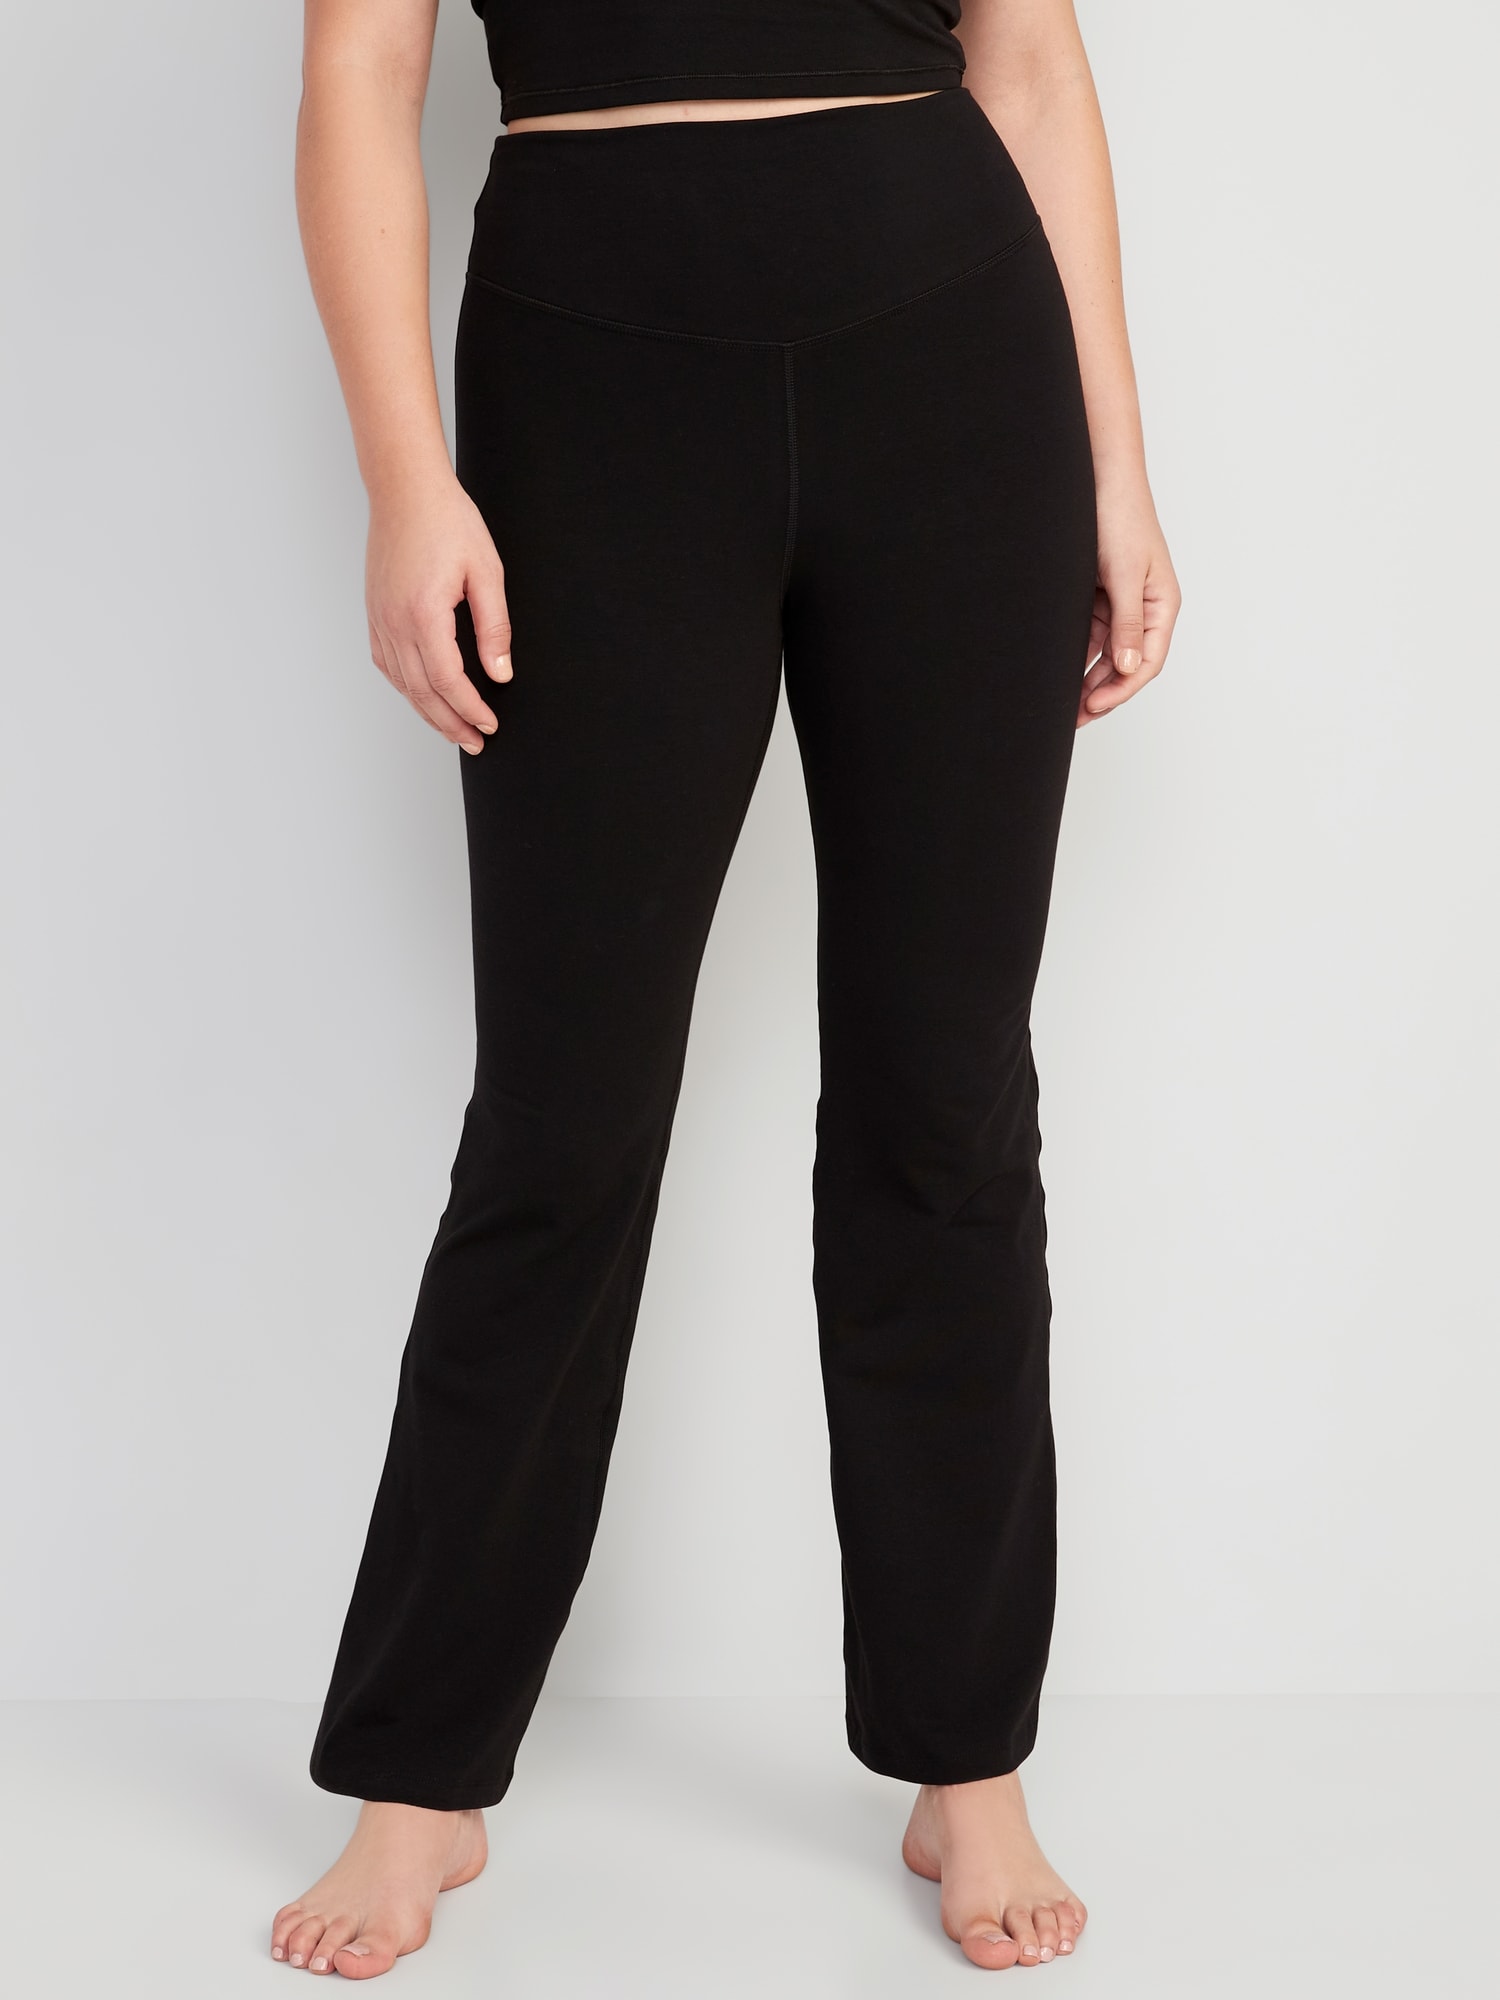 Old Navy Extra High-Waisted PowerChill Cropped Wide-Leg Yoga Pants for  Women